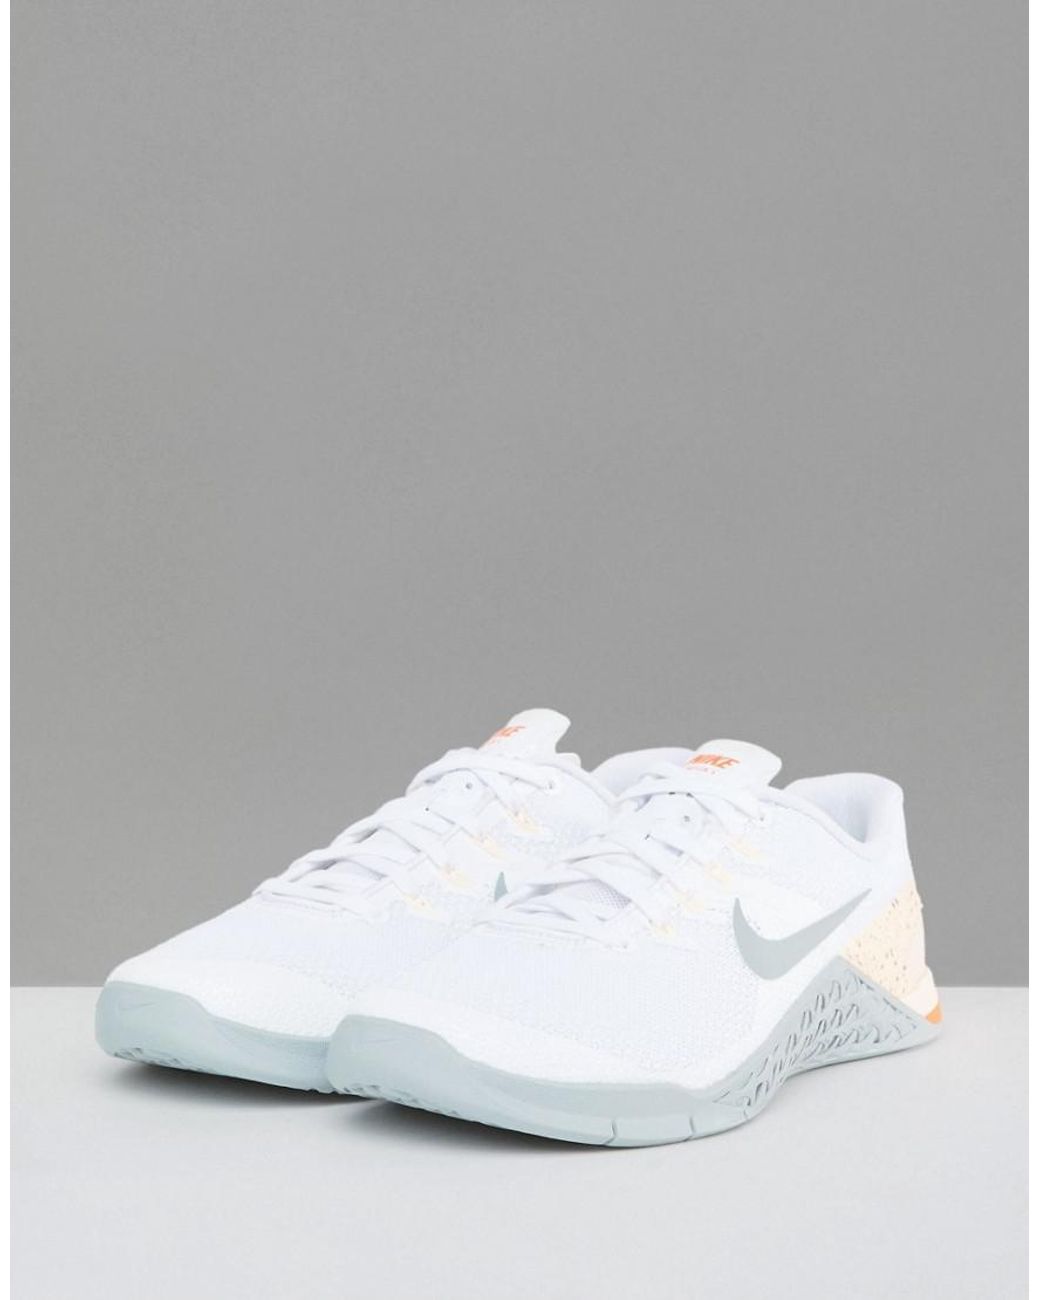 Nike Metcon Trainers womens metcon trainers In White And Peach